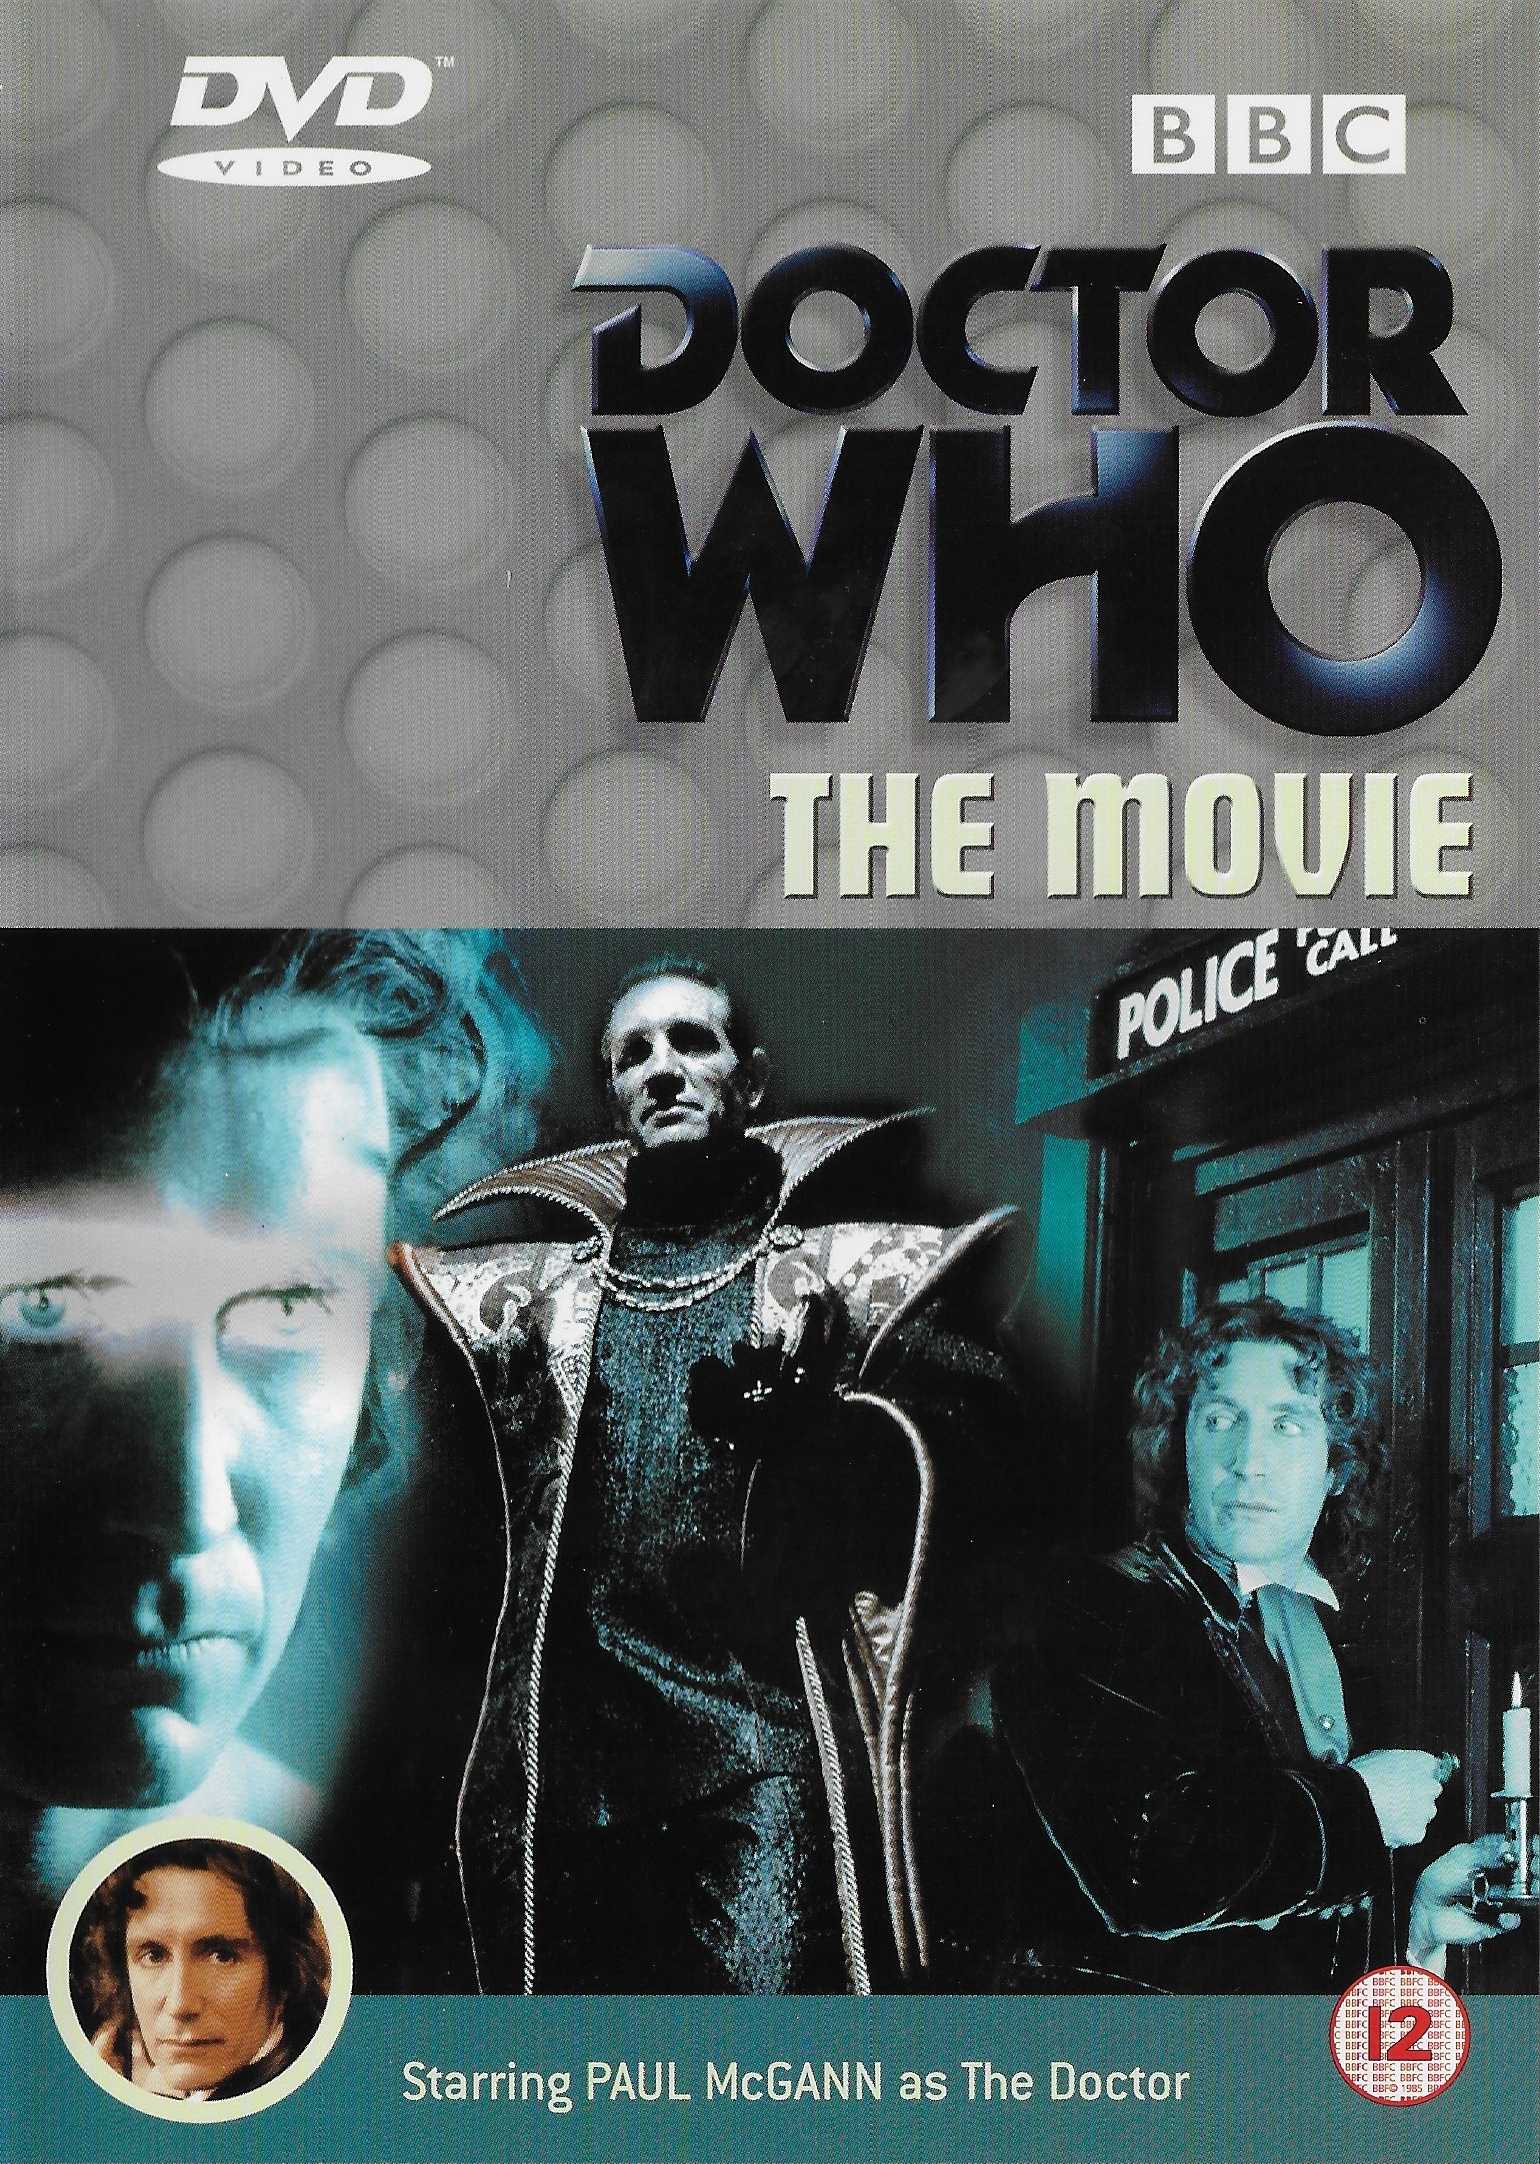 Picture of BBCDVD 1043 Doctor Who - The movie by artist Matthew Jacobs from the BBC records and Tapes library